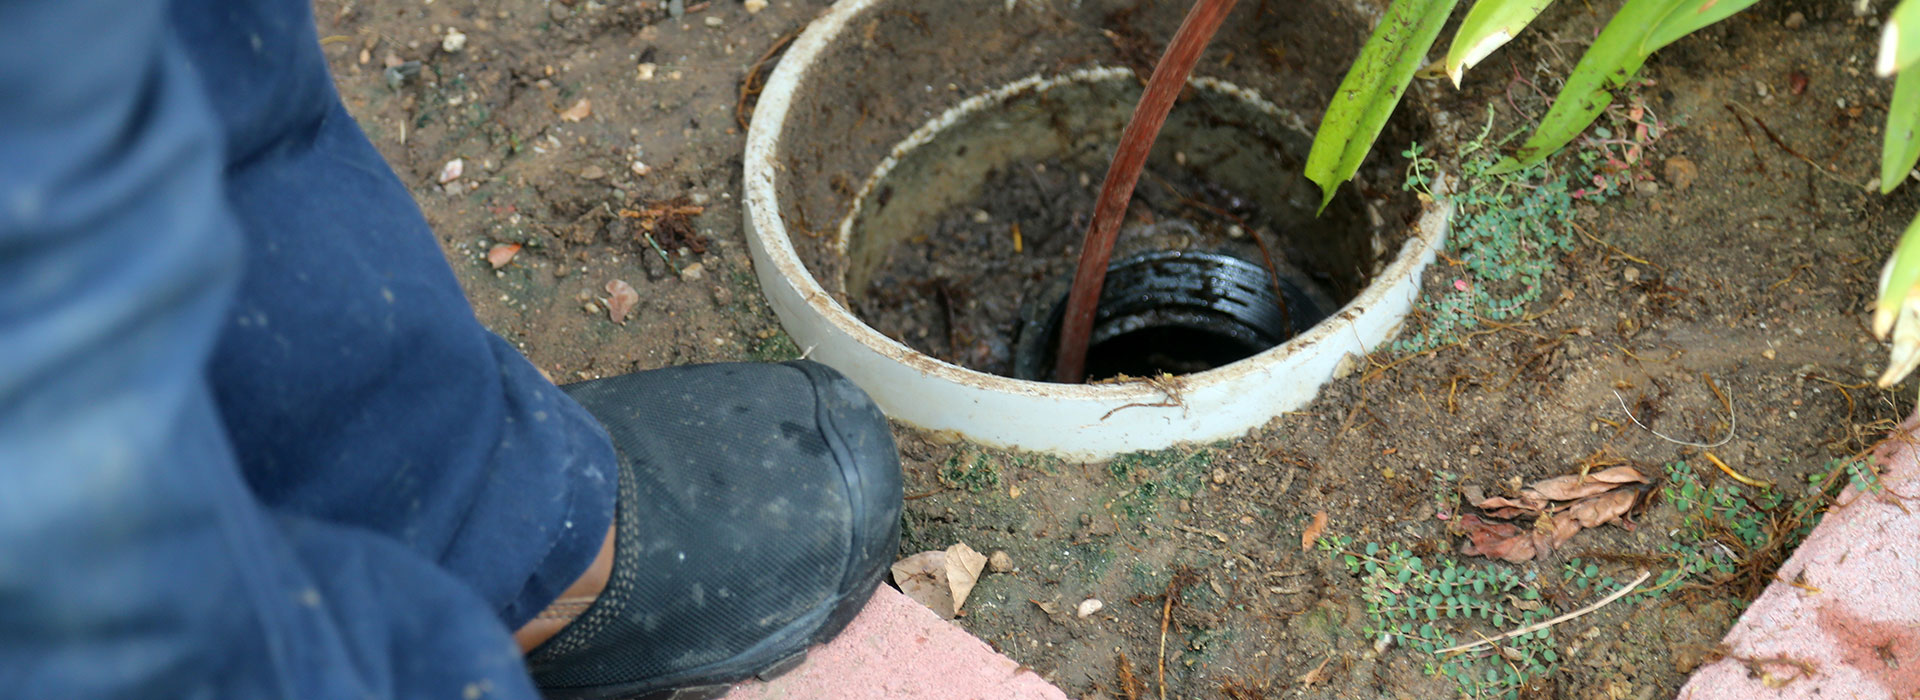 Blocked Drains Adelaide |  Same Day Plumbing Services 24/7